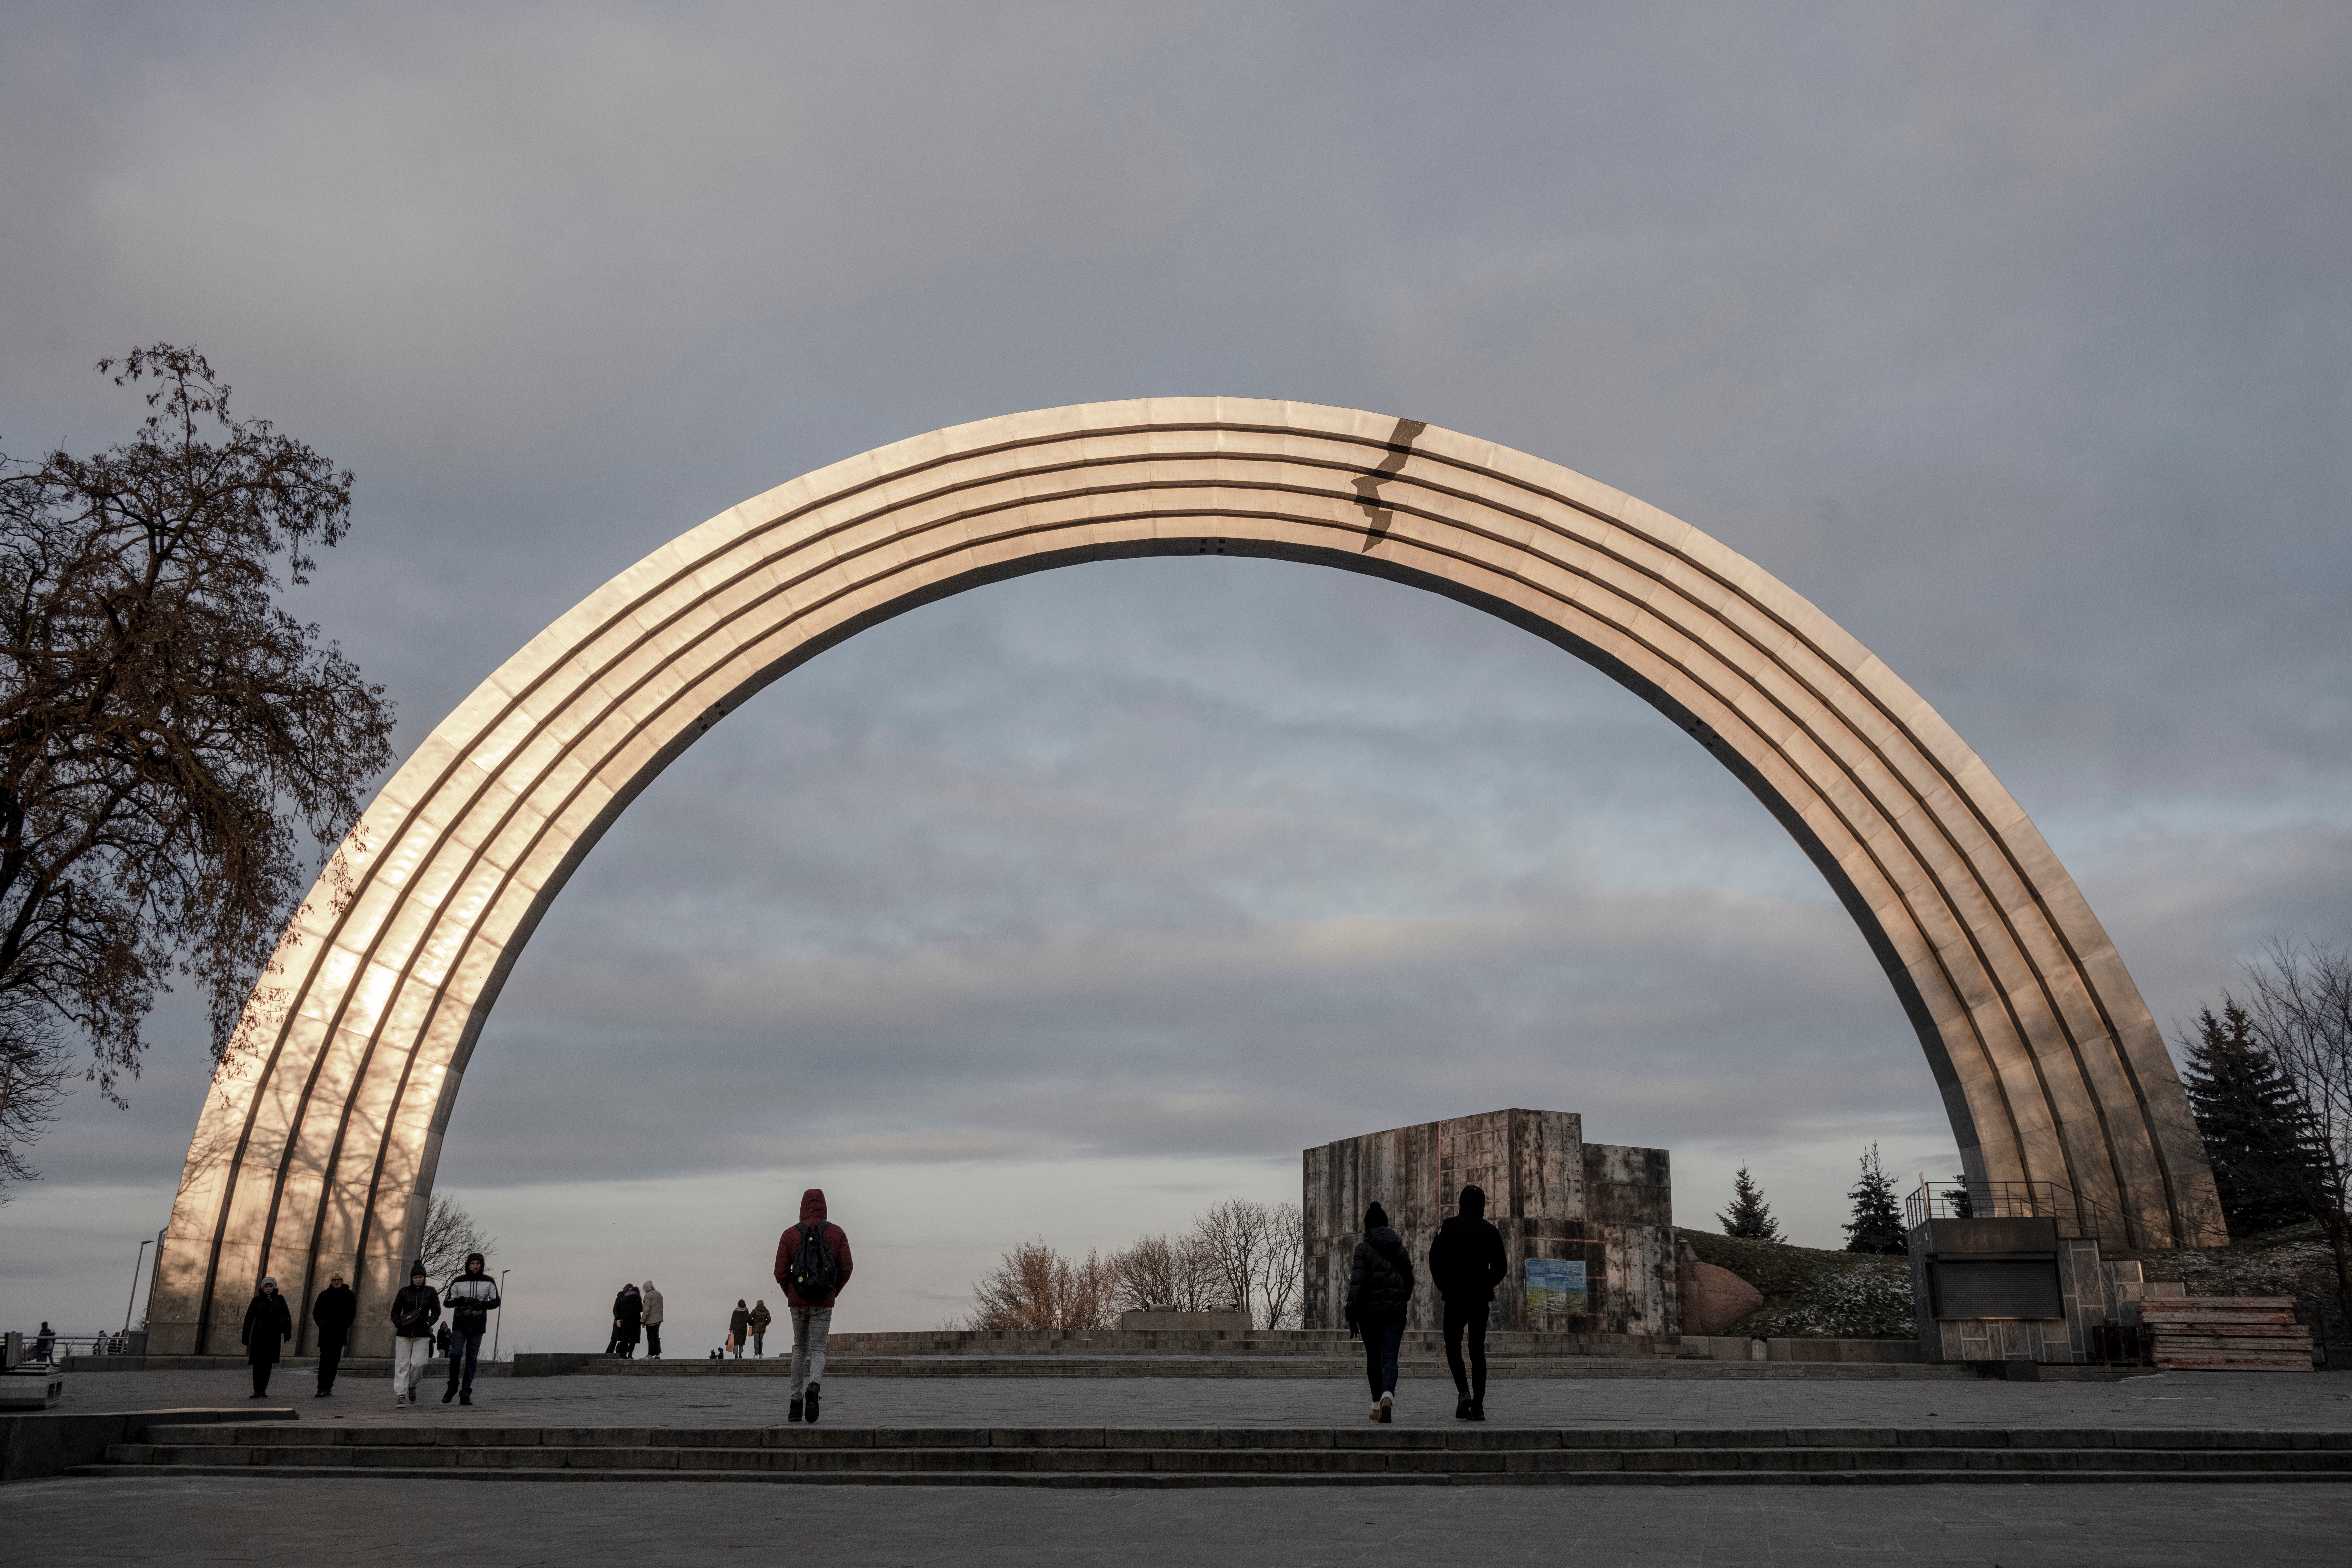 The Soviet Union gave Ukraine this Kyiv installation, called the People’s Friendship Arch, in 1982. In May of last year, it was renamed the Arch of Freedom of the Ukrainian People